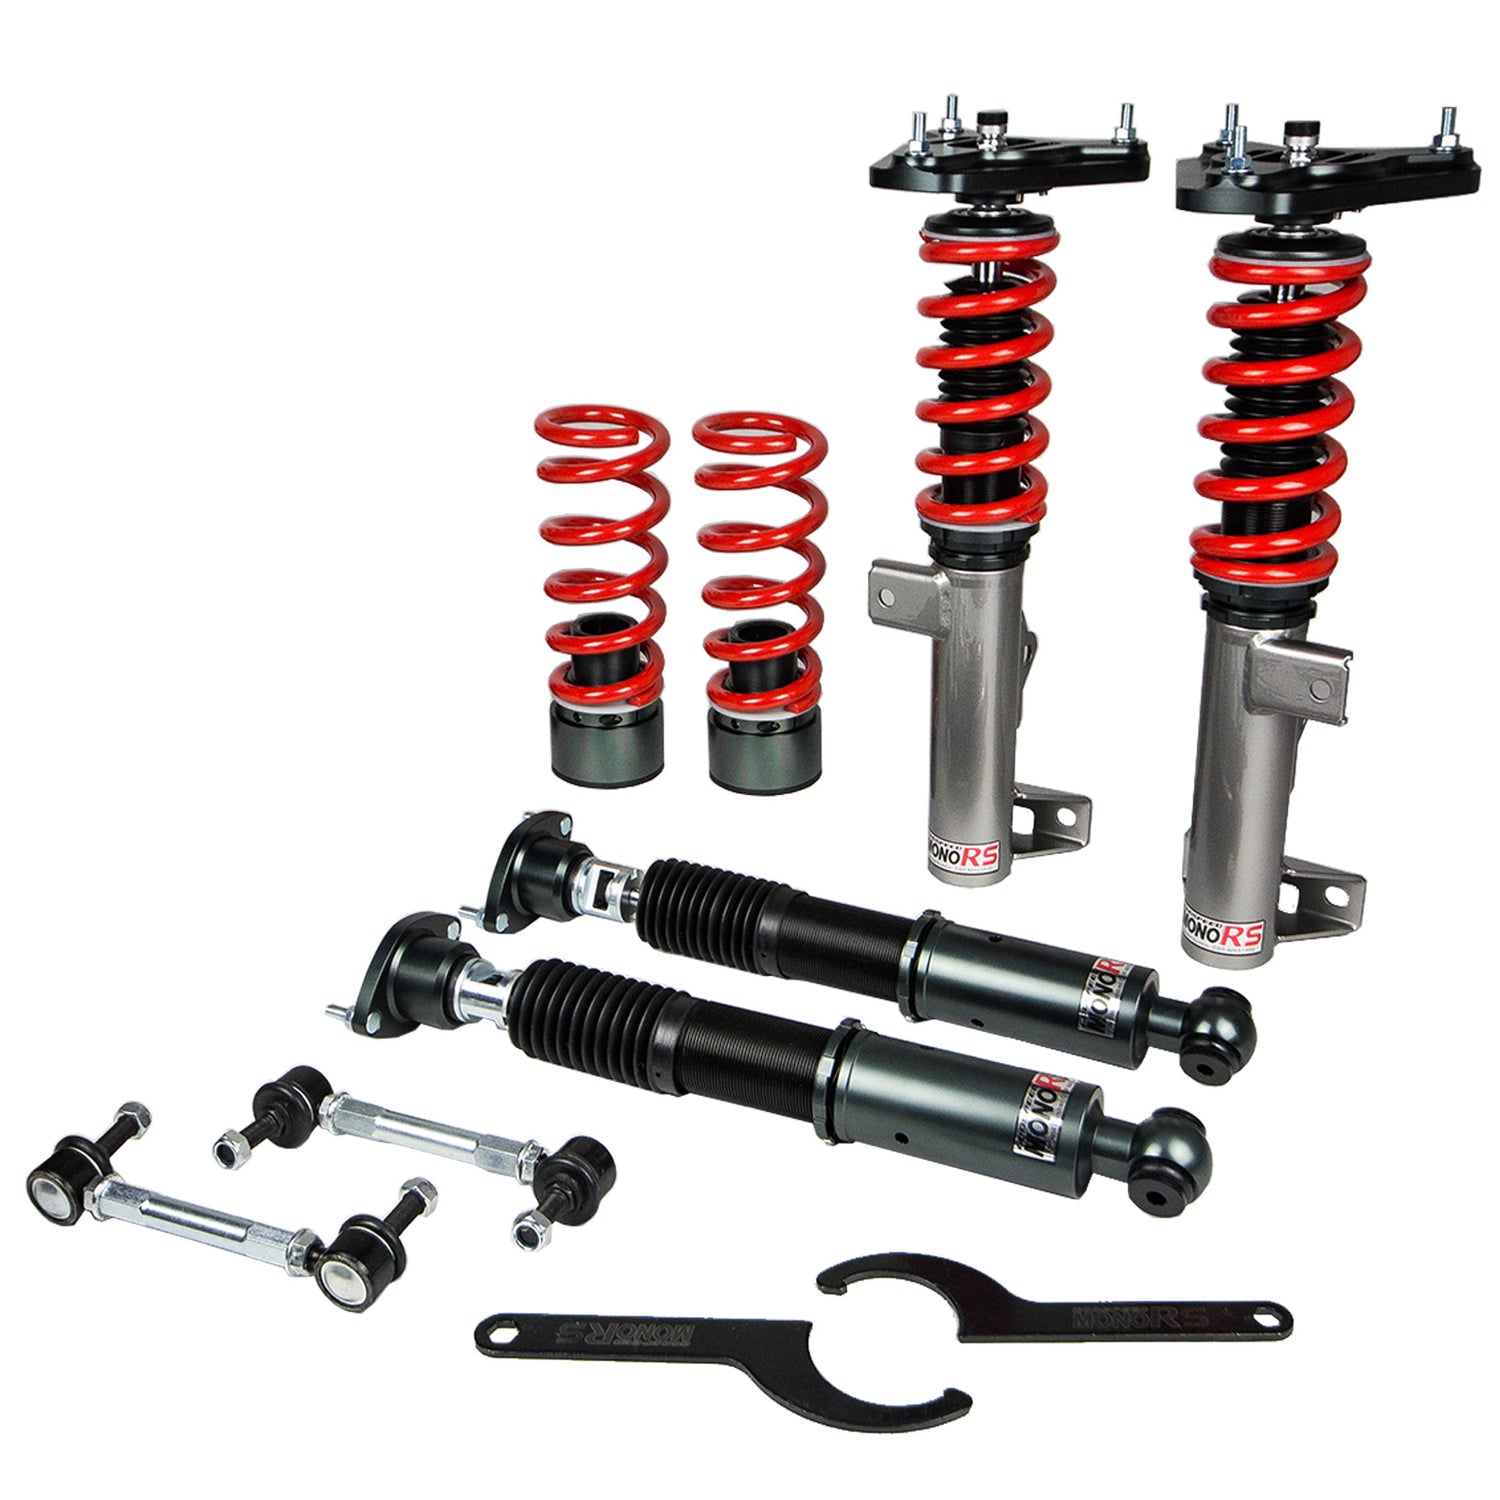 Godspeed MRS1890-A MonoRS Coilover Lowering Kit, 32 Damping Adjustment, Ride Height Adjustable